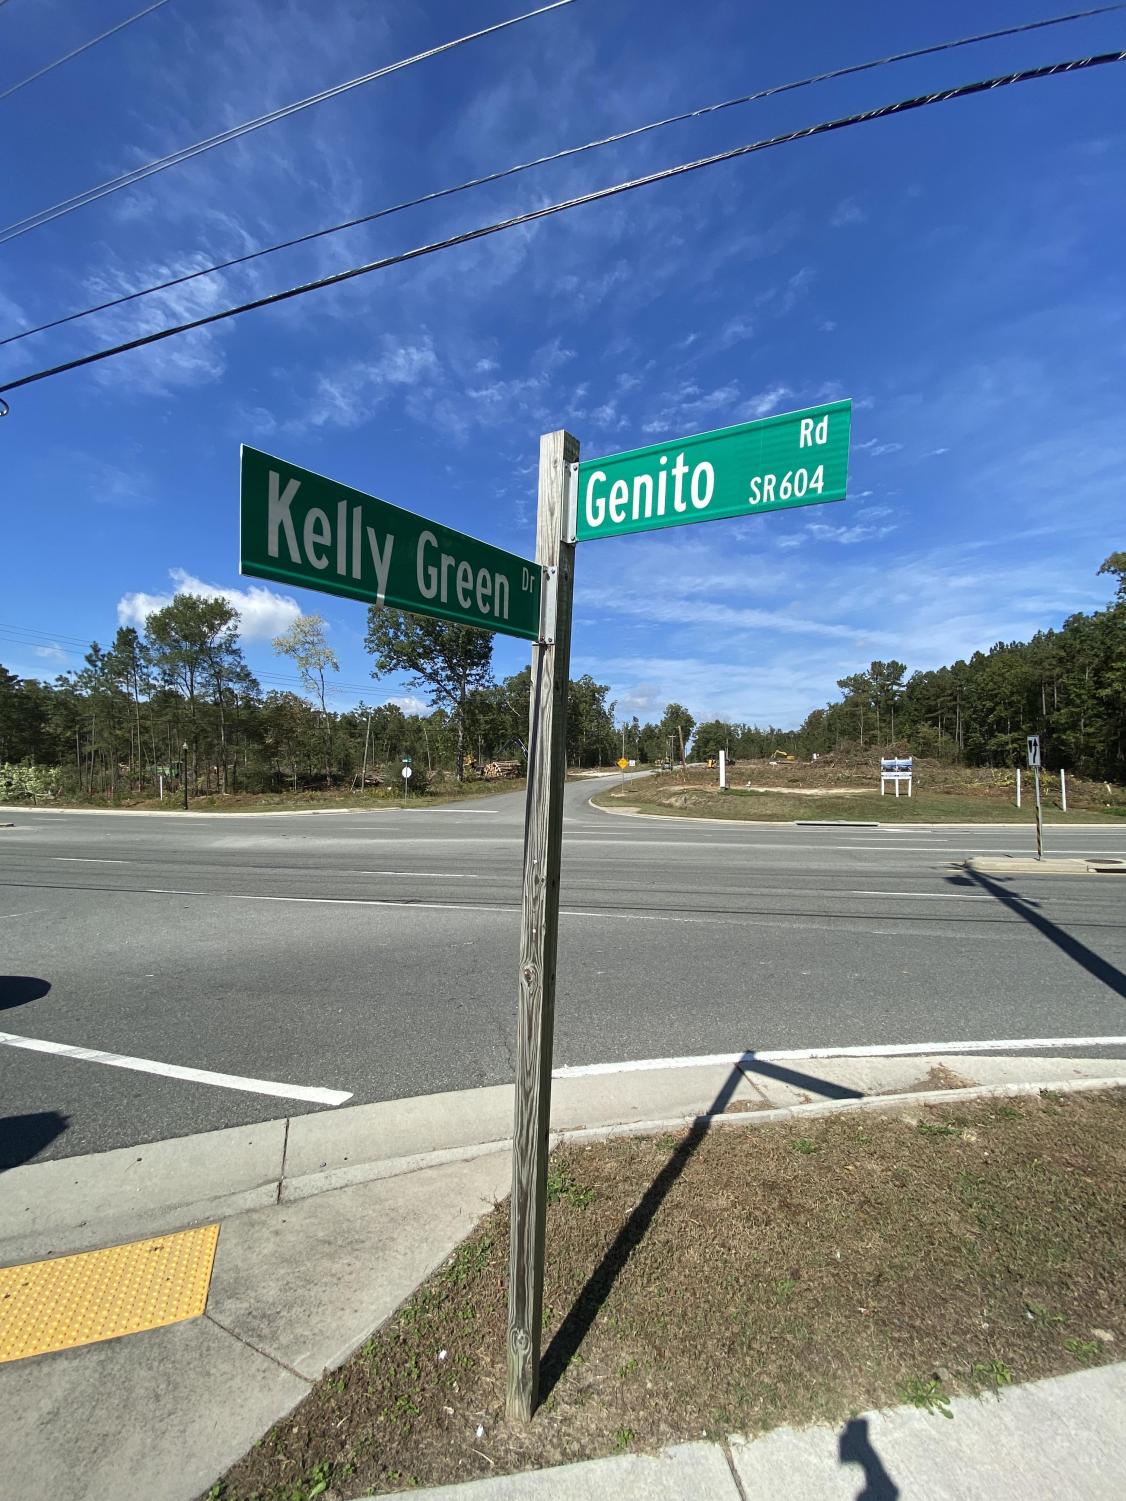 The Lake will be on Genito Road, which is right next to Clover Hill. 